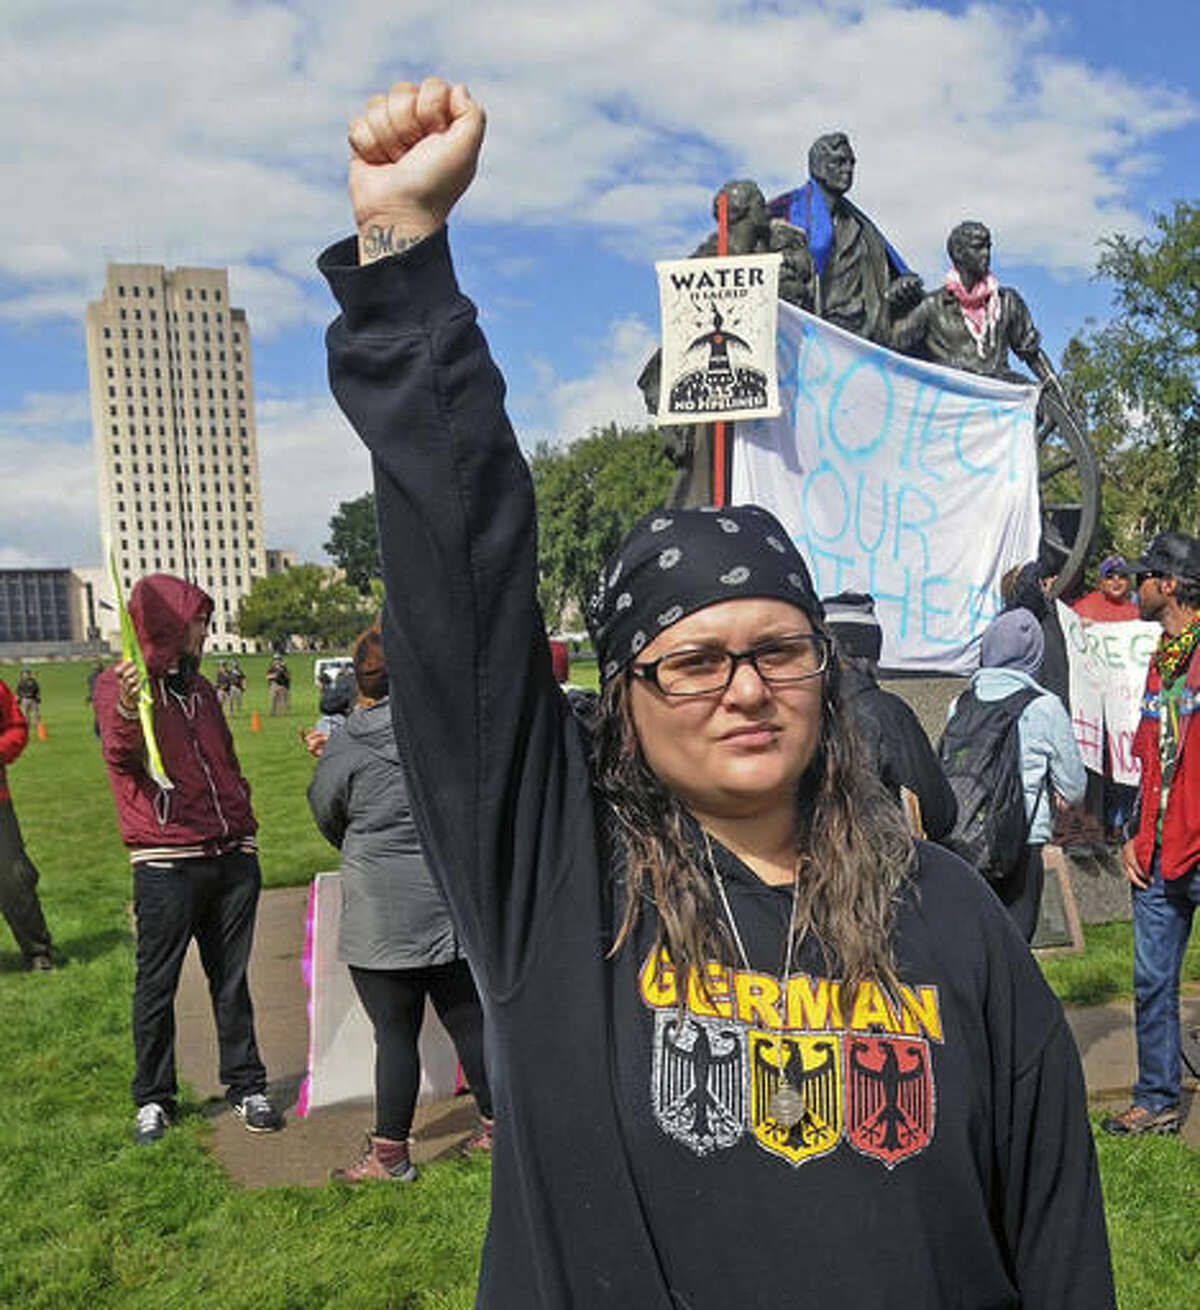 Megan Tobin, of Bellevue, Ohio protests on the grounds of the North Dakota state capitol Friday, Sept. 9, 2016 in Bismarck, N.D. The federal government stepped into the fight over the Dakota Access oil pipeline Friday, ordering work to stop on one segment of the project in North Dakota and asking the Texas-based company building it to "voluntarily pause" action on a wider span that an American Indian tribe says holds sacred artifacts. (Tom Stromme/The Bismarck Tribune via AP)